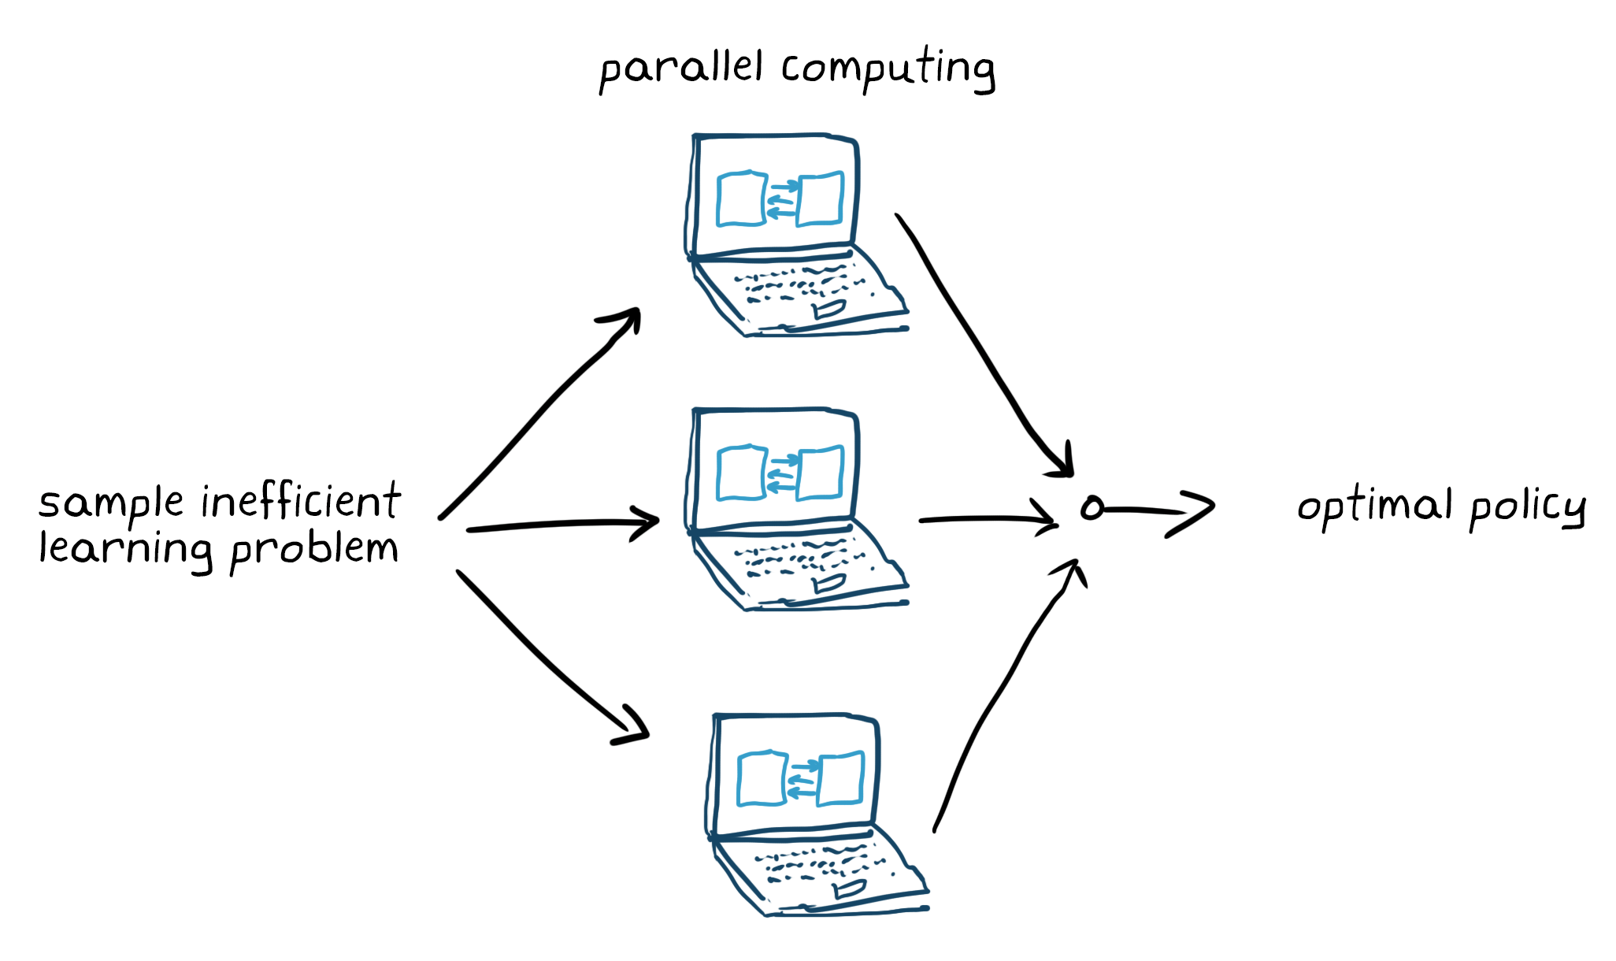 Figure 5. Training sample inefficient learning problem with parallel computing.